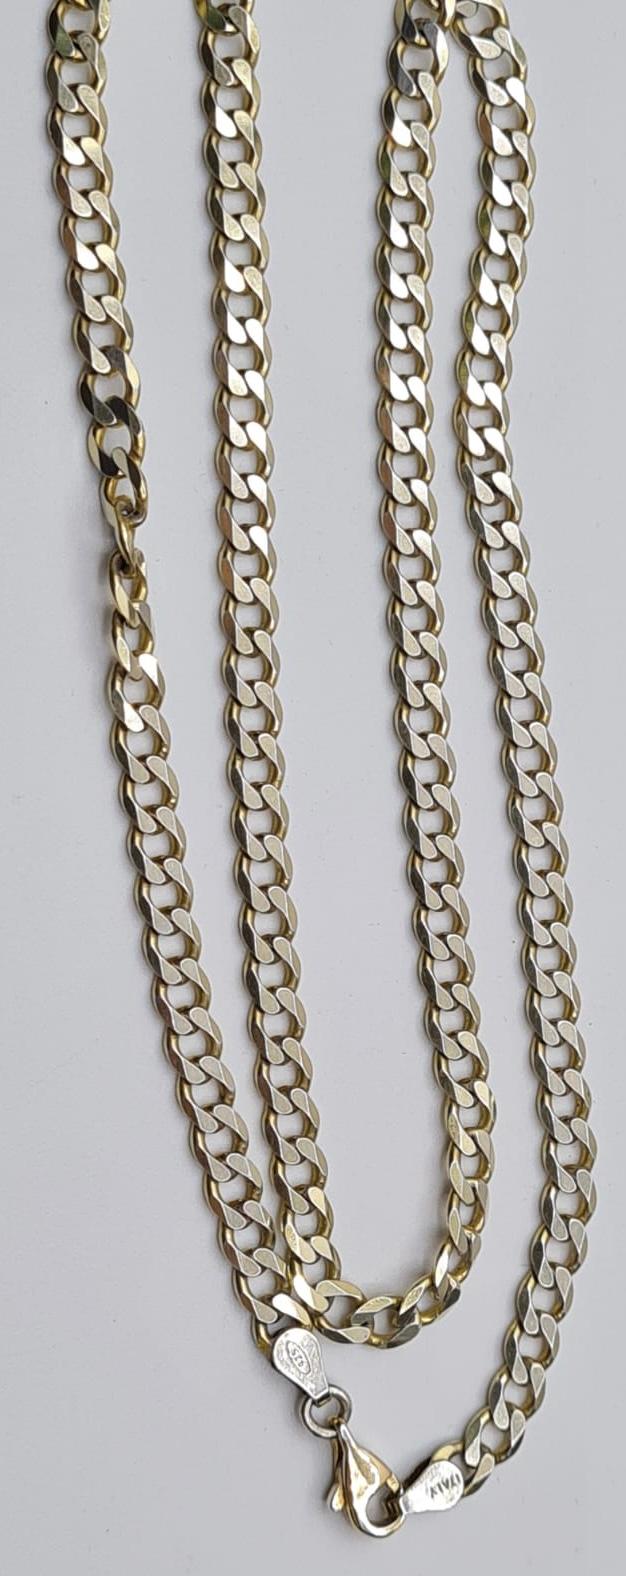 A Quality Silver Curb Link Chain Necklace, 48cm Long Approx. Stamped Italy 925 Silver.